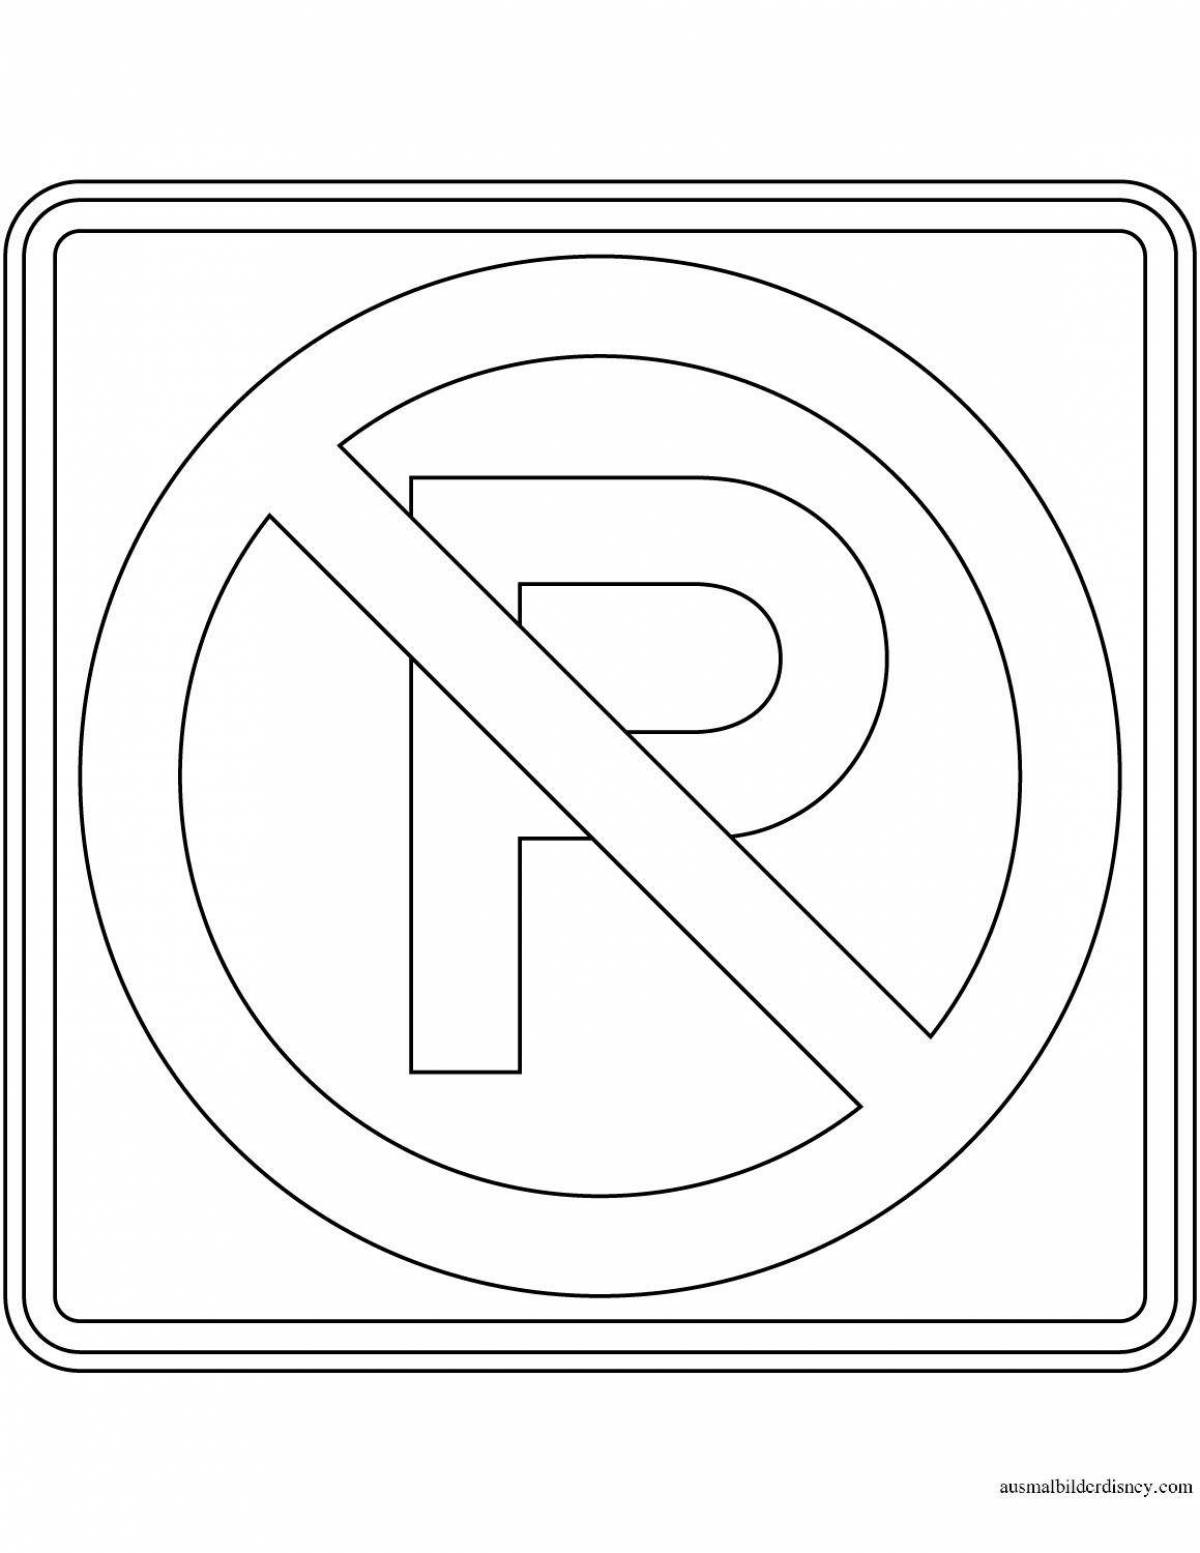 Fascinating parking road sign coloring page